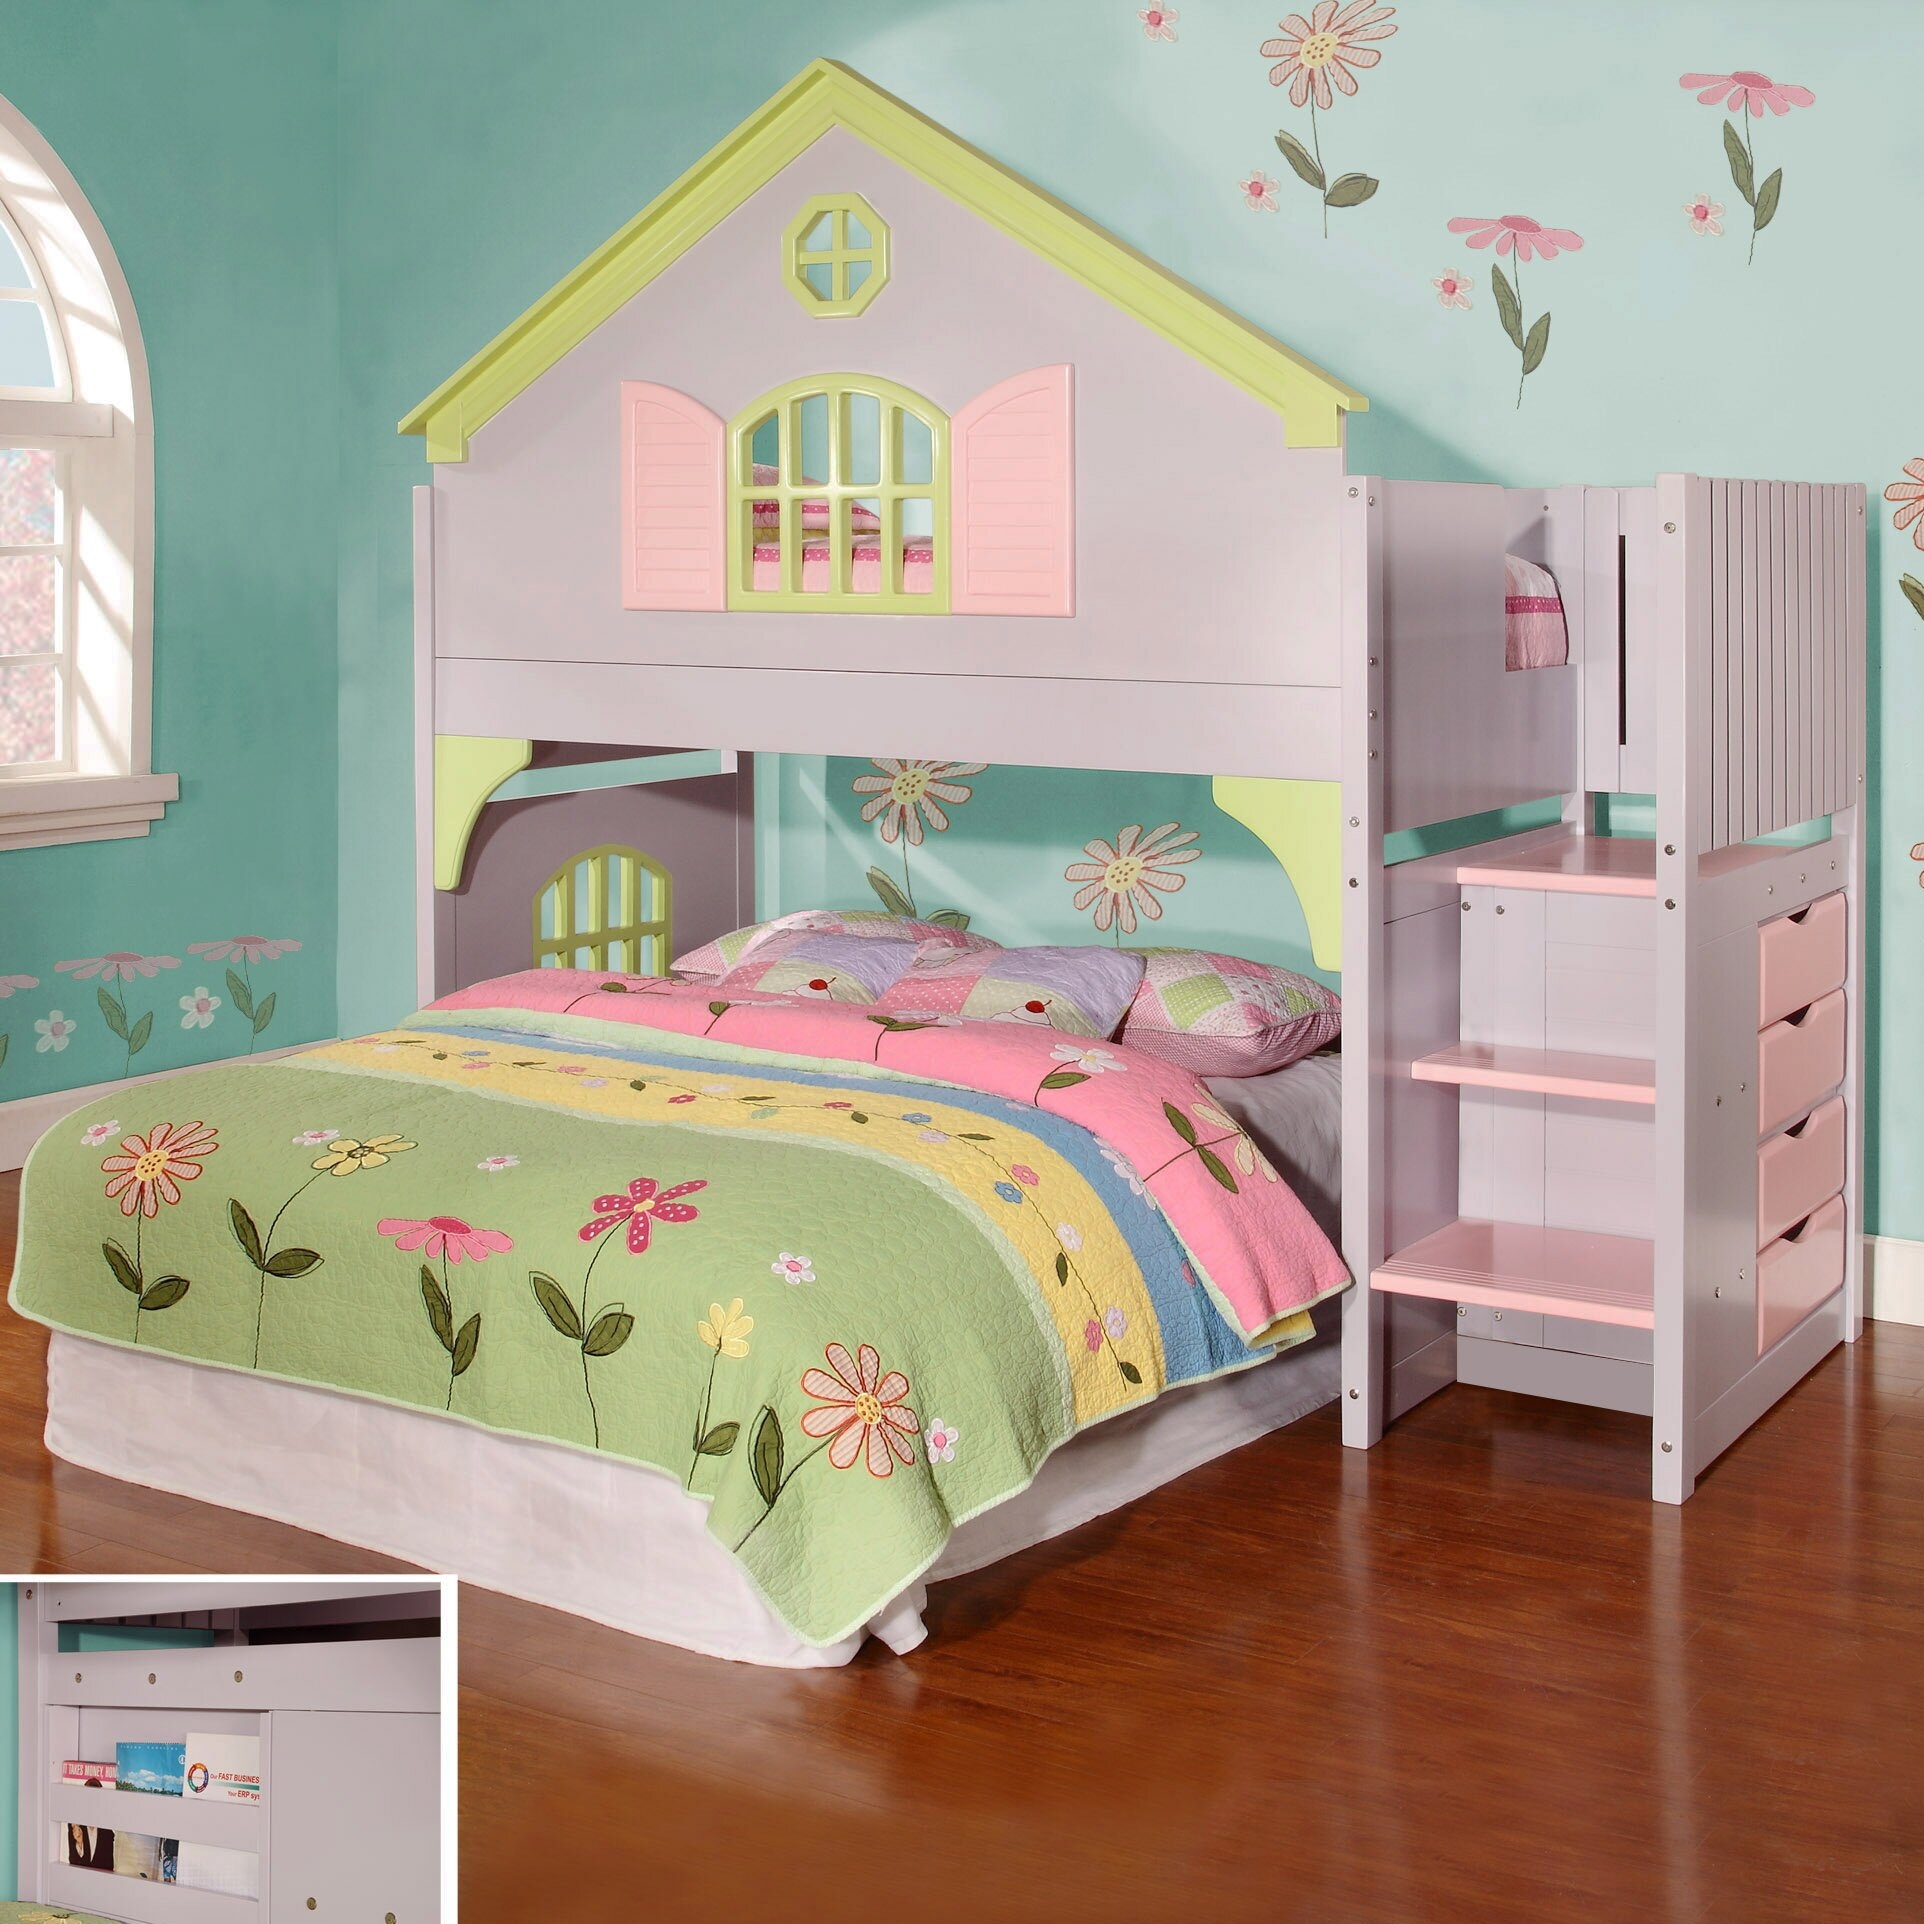 children's twin size beds